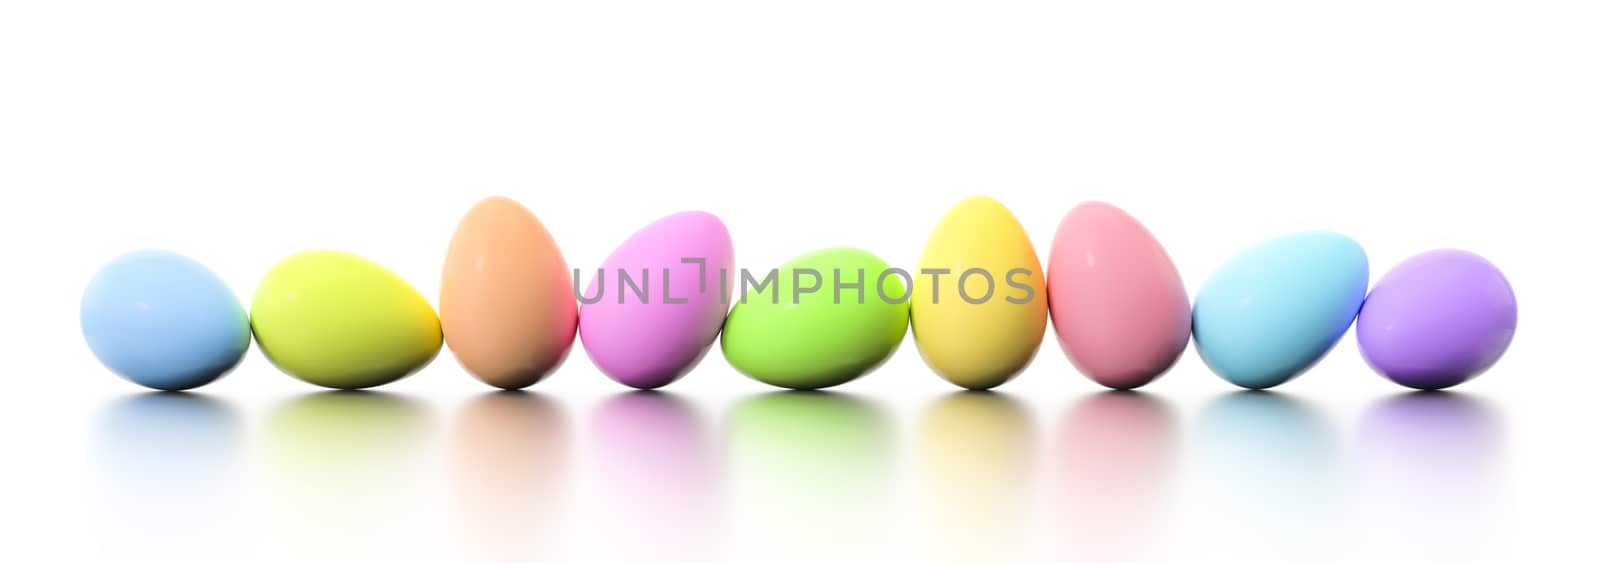 3d illustration of a row of dyed easter eggs